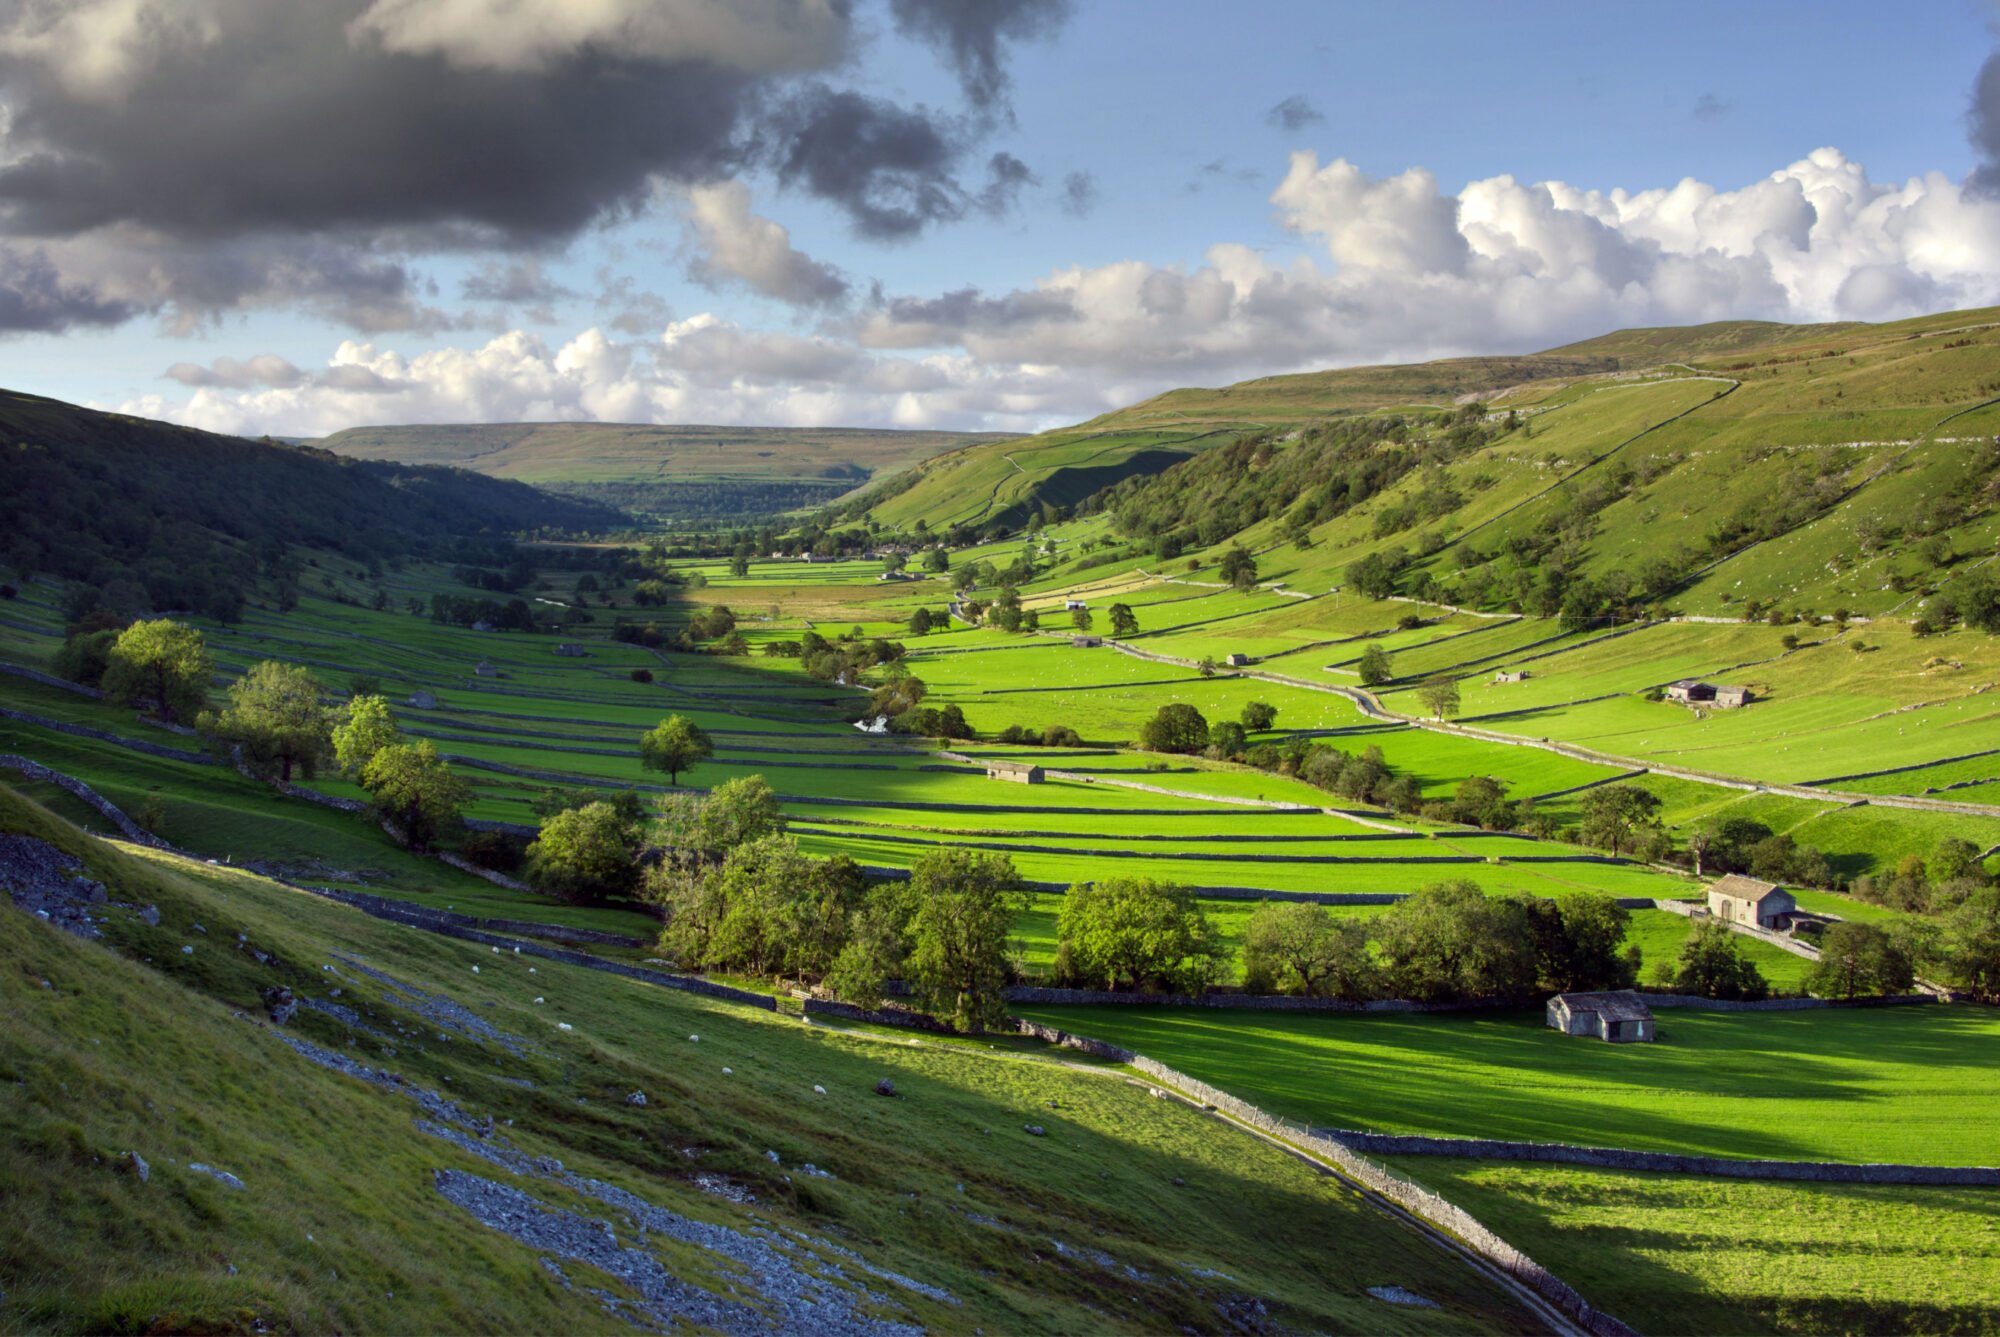 Walk: Wharfedale and Littondale